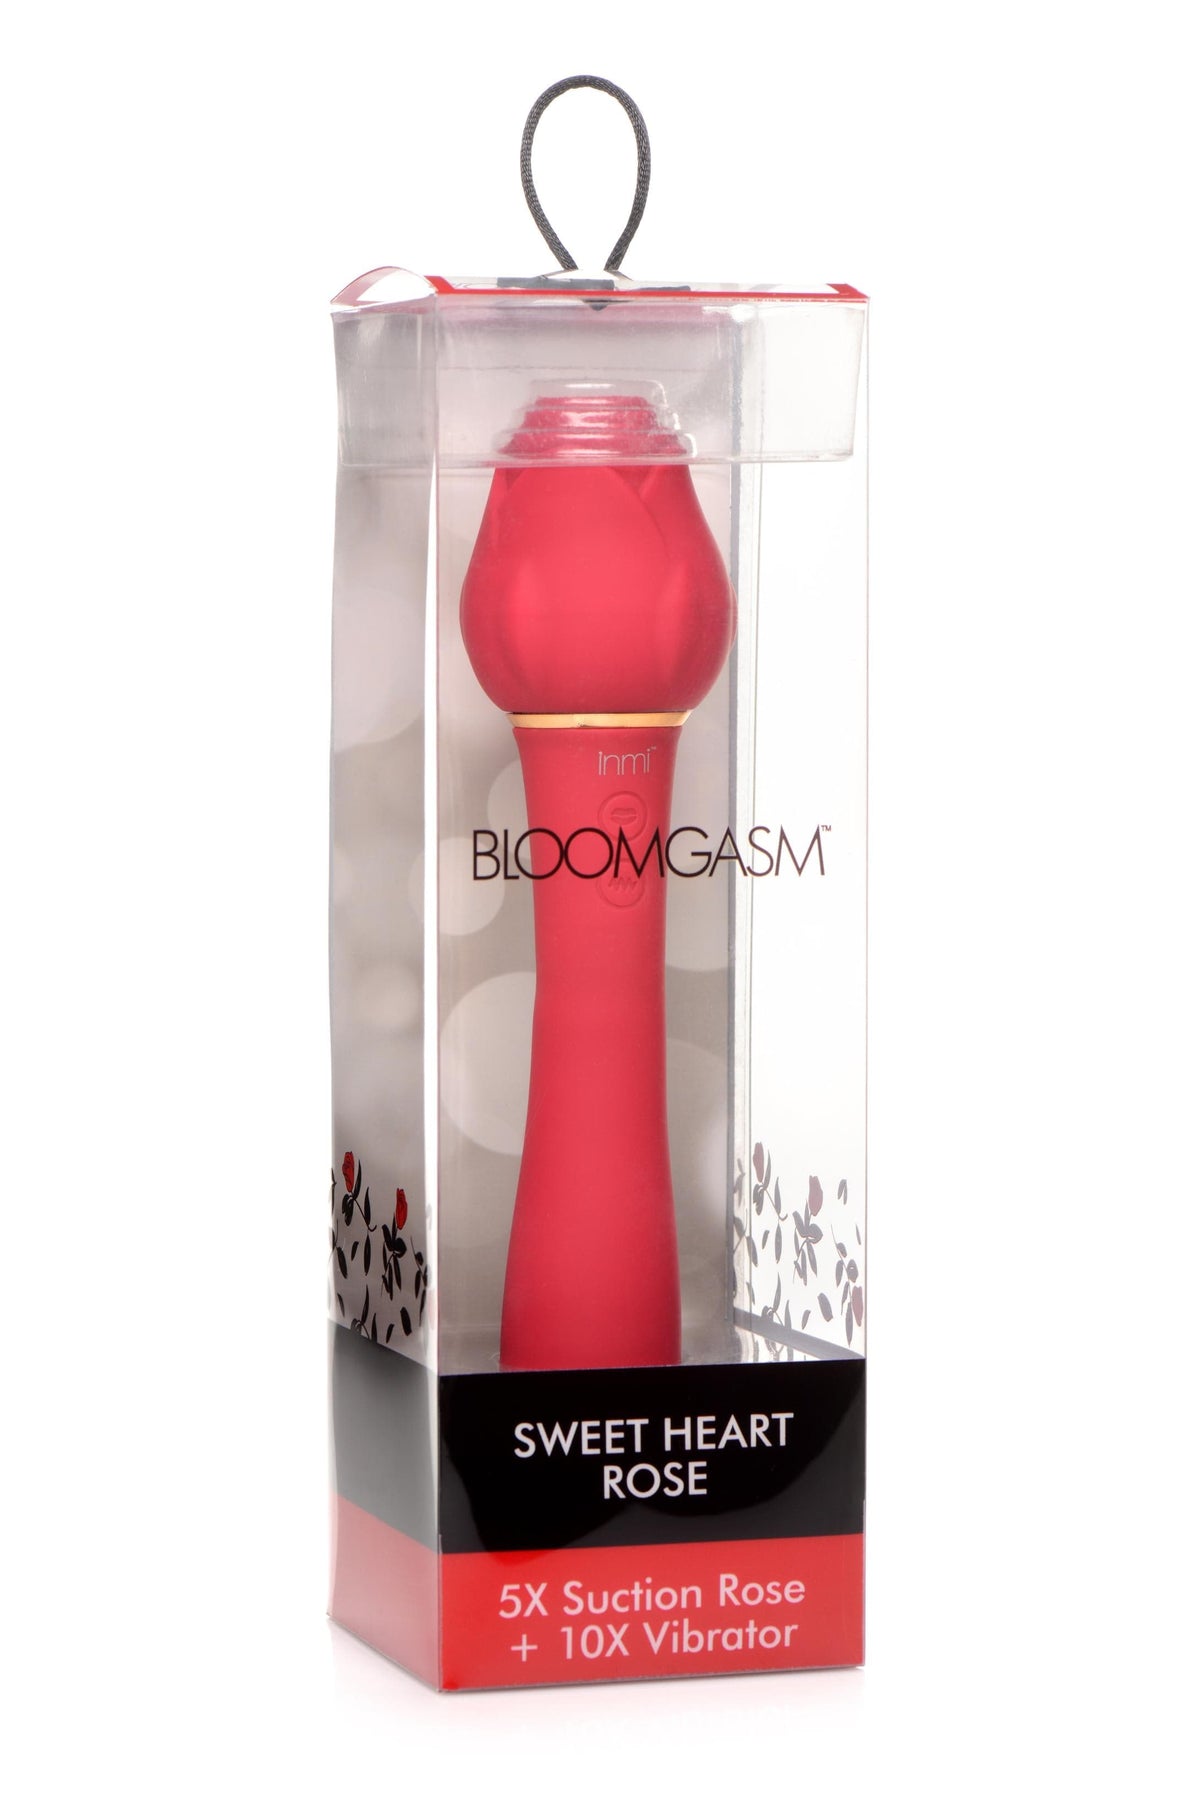 bloomgasm sweet heart rose 5x suction rose and 10x vibrator pink